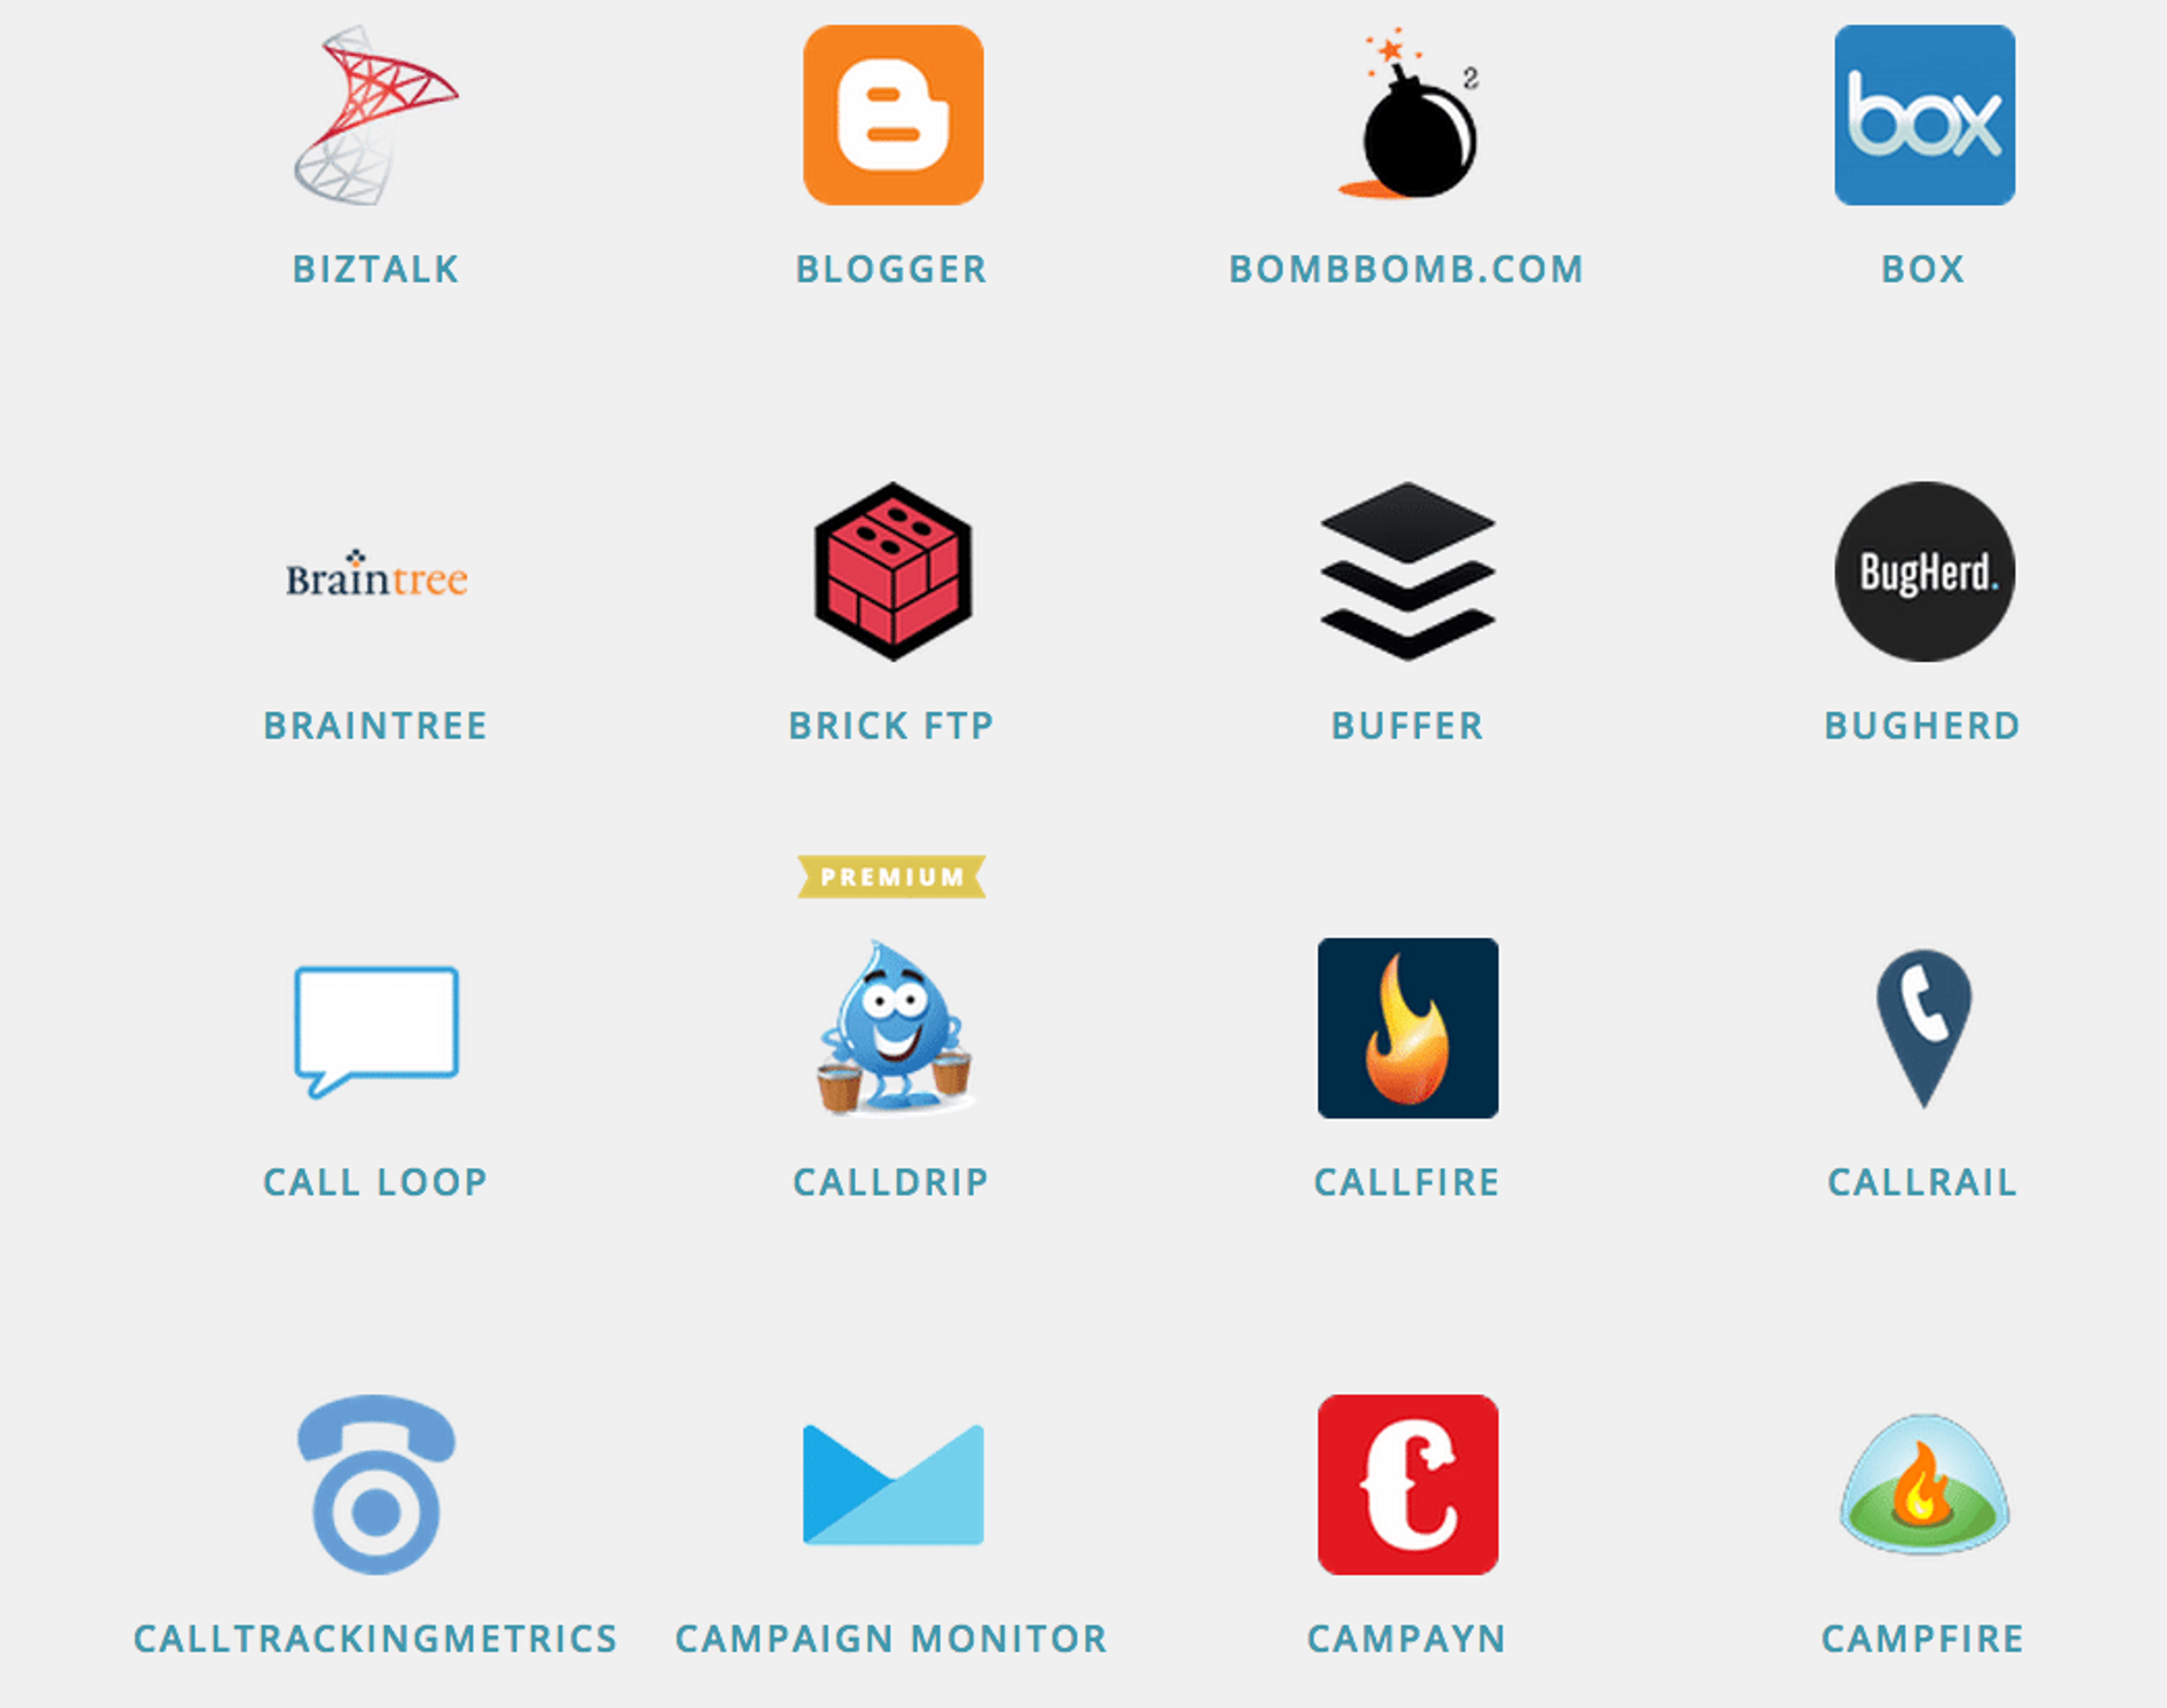 The Big List of Zapier Hacks for Marketers: 46 Recipes For Social Media, Productivity and More